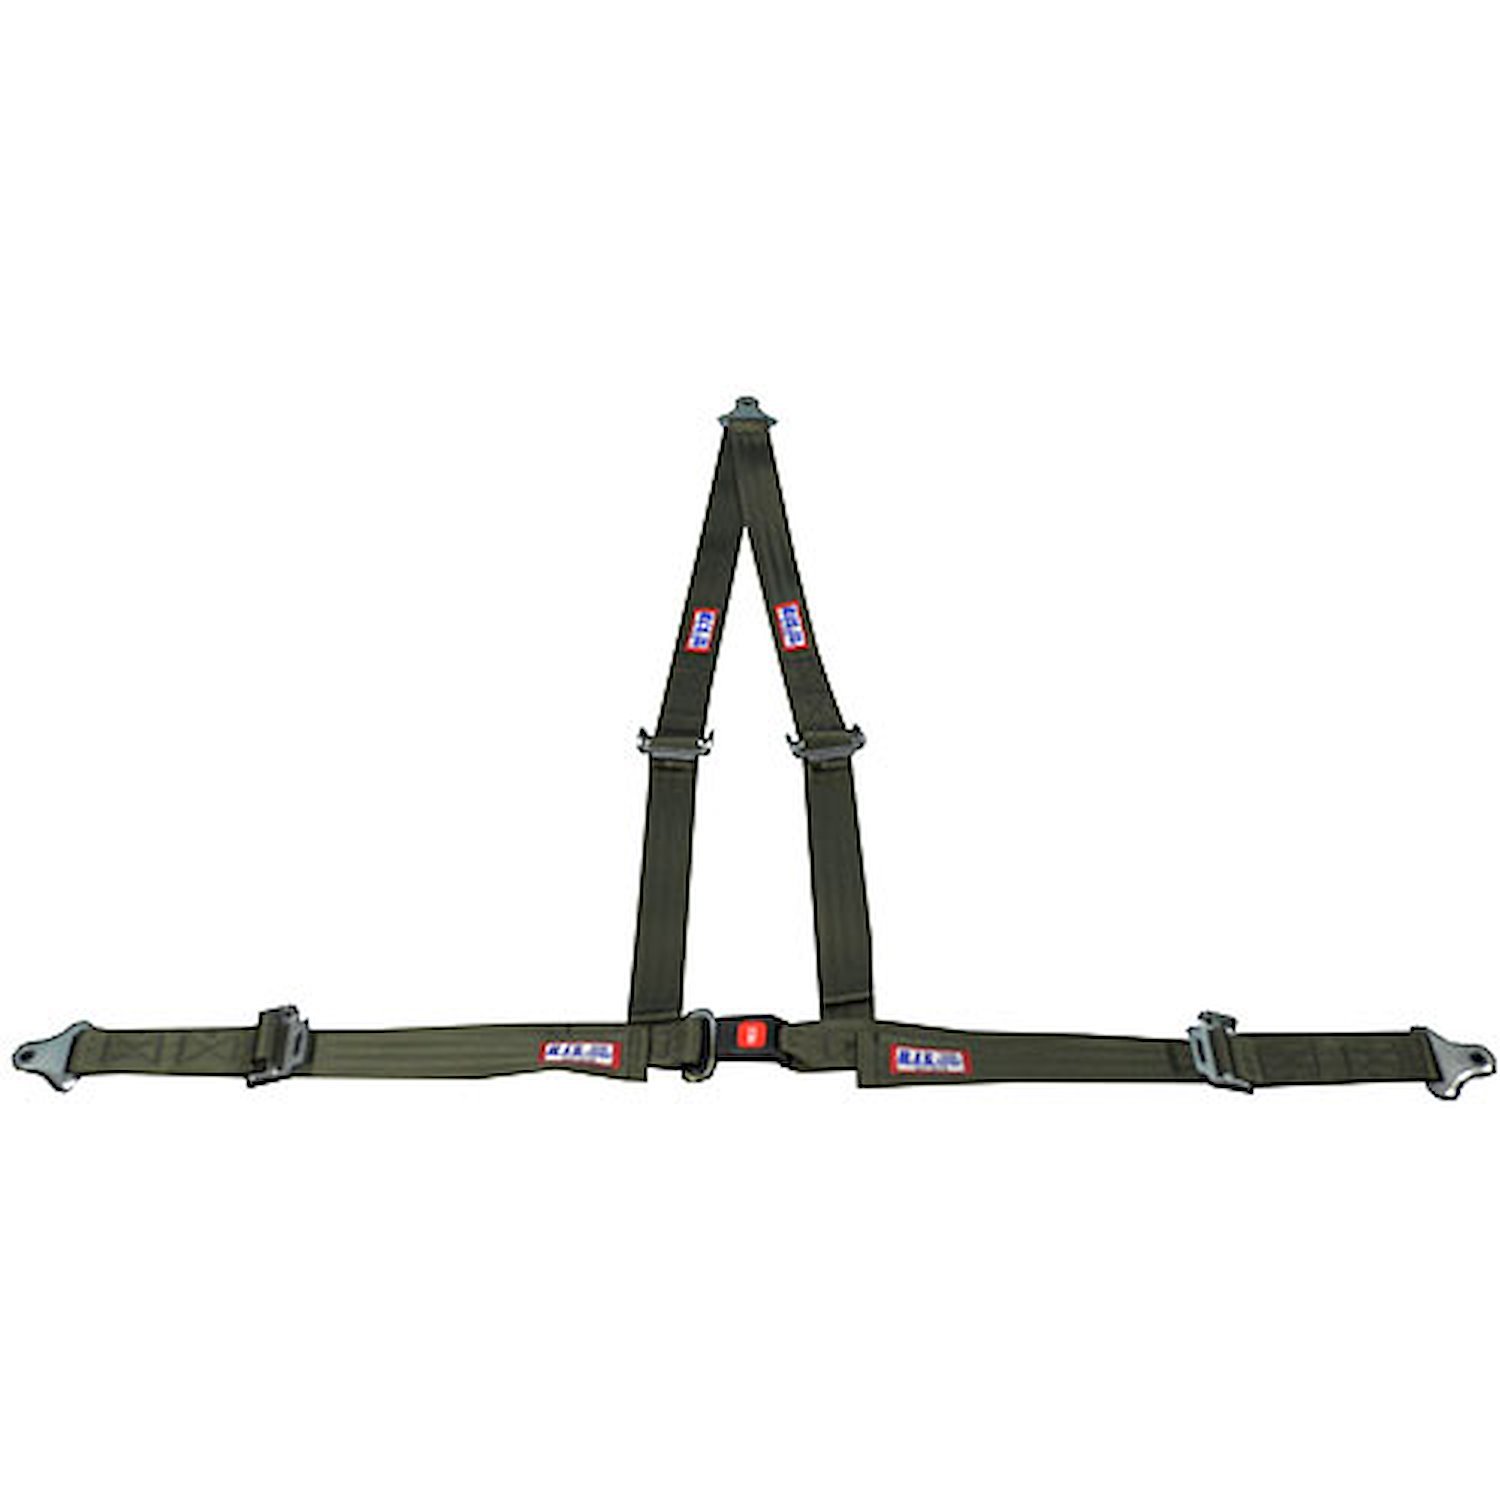 Buckle and Tongue Style Harness with Roll Bar